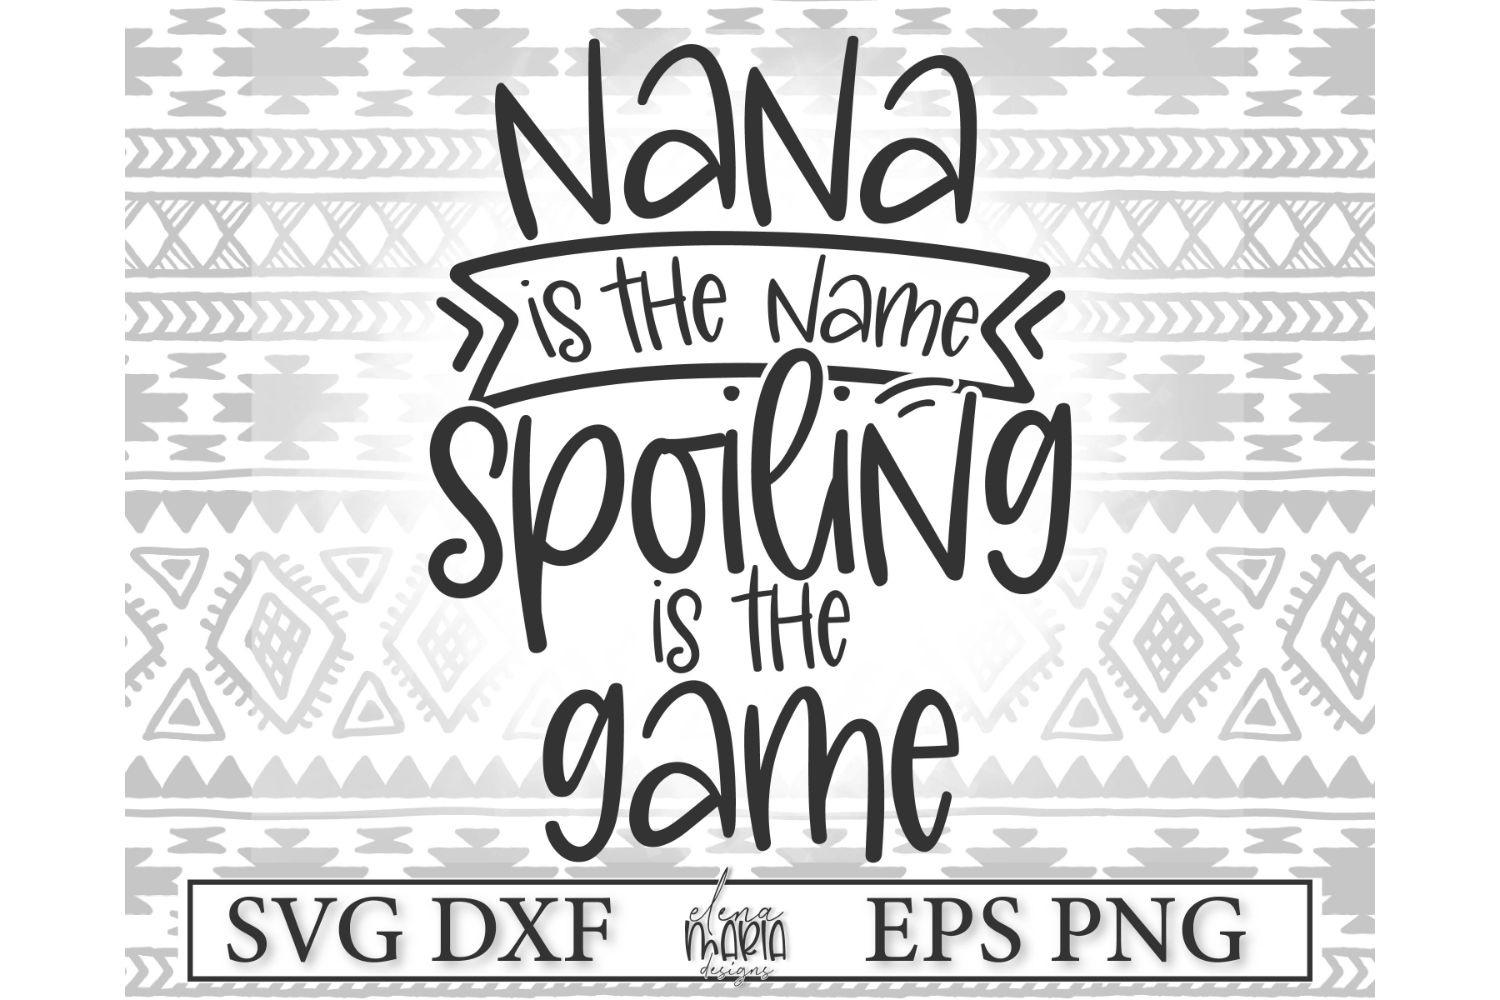 Download Nana is the name spoiling is the game SVG File